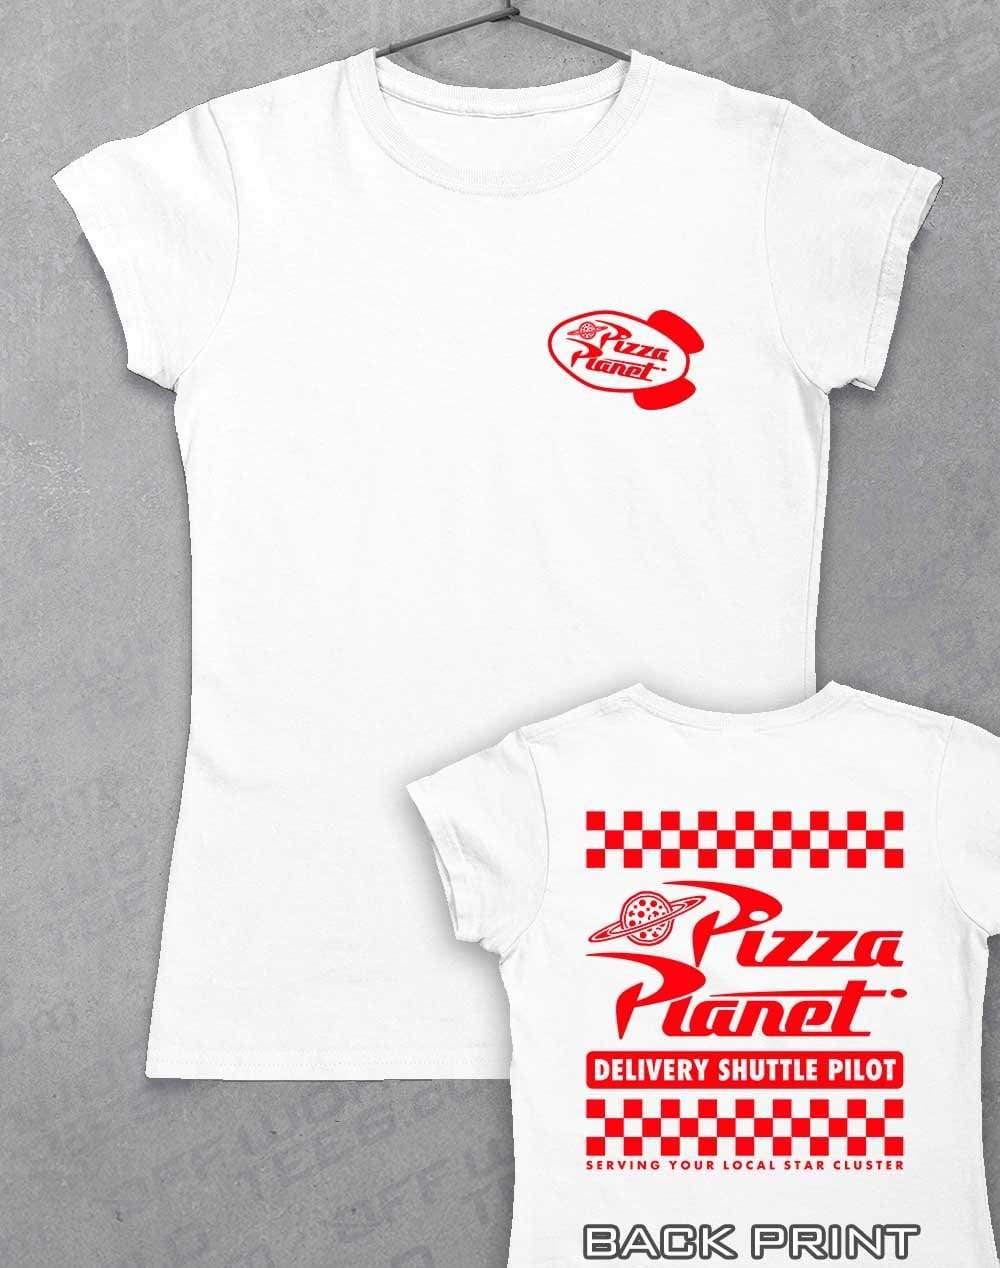 Pizza Planet Shuttle Pilot with Back Print Womens T-Shirt 8-10 / White  - Off World Tees